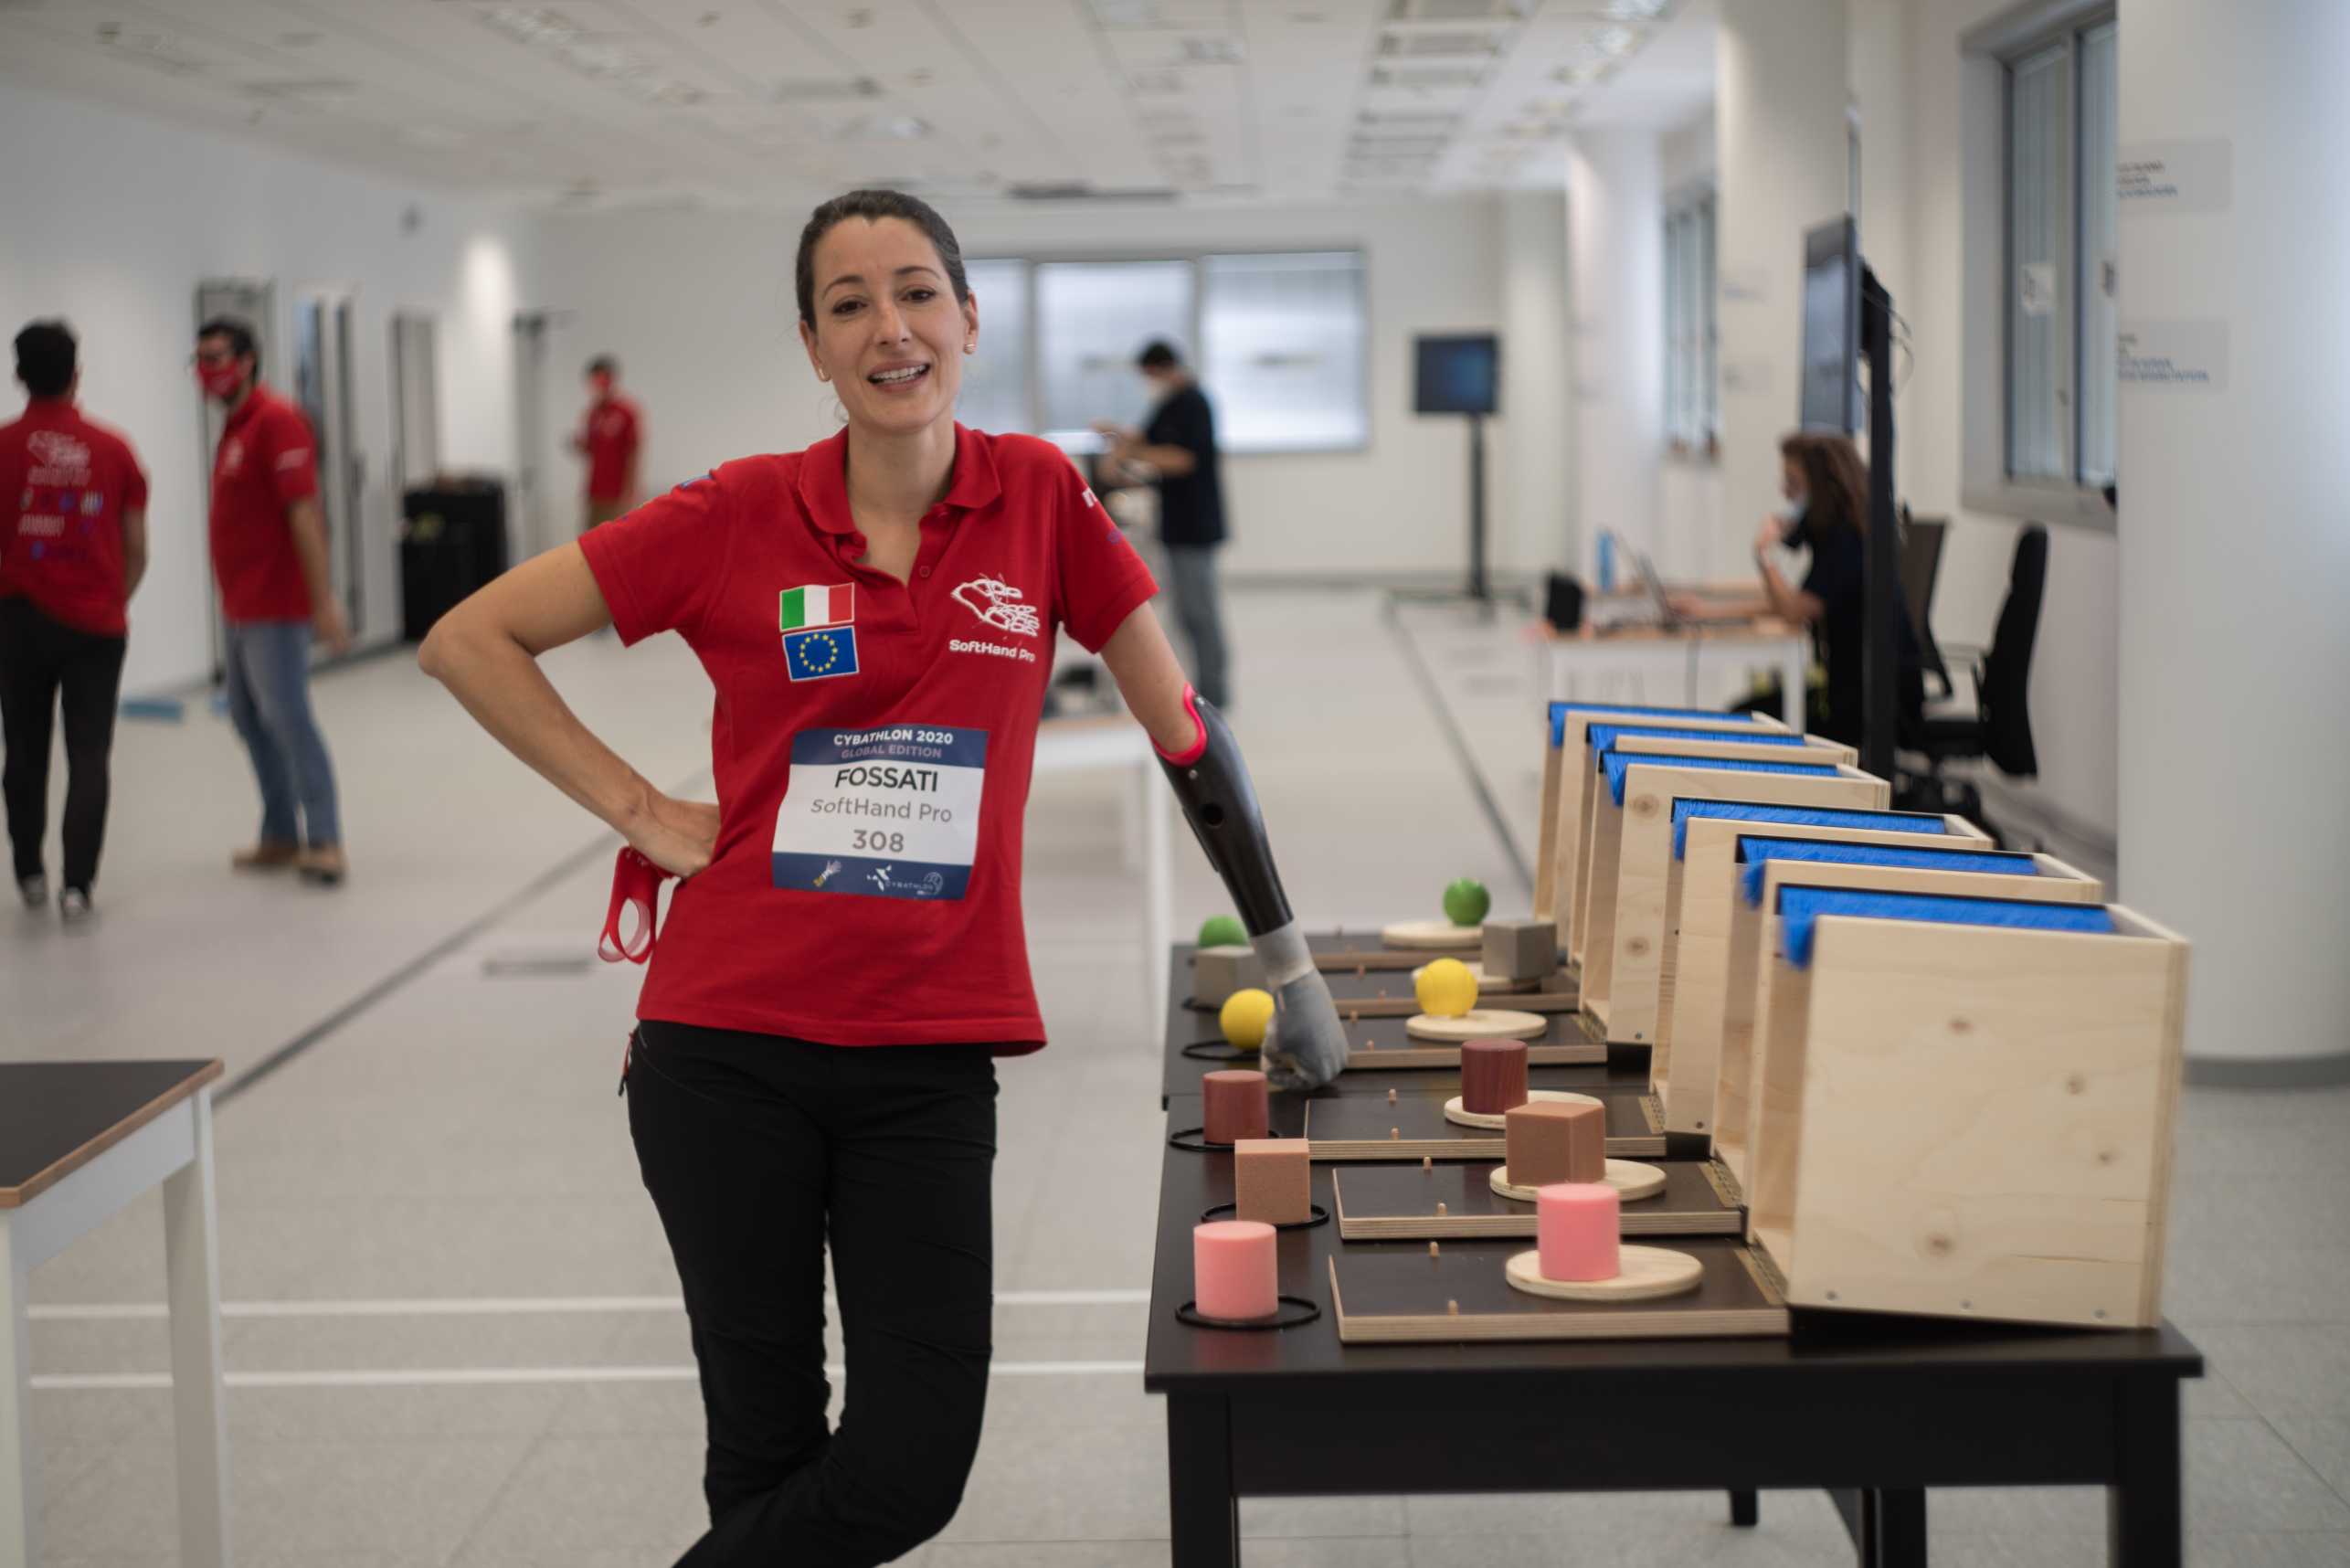 Maria Fossati, designer and researcher, standing next to what appears to be a table with CYBATHLON competition props. She is resting her prosthetic arm on the table.